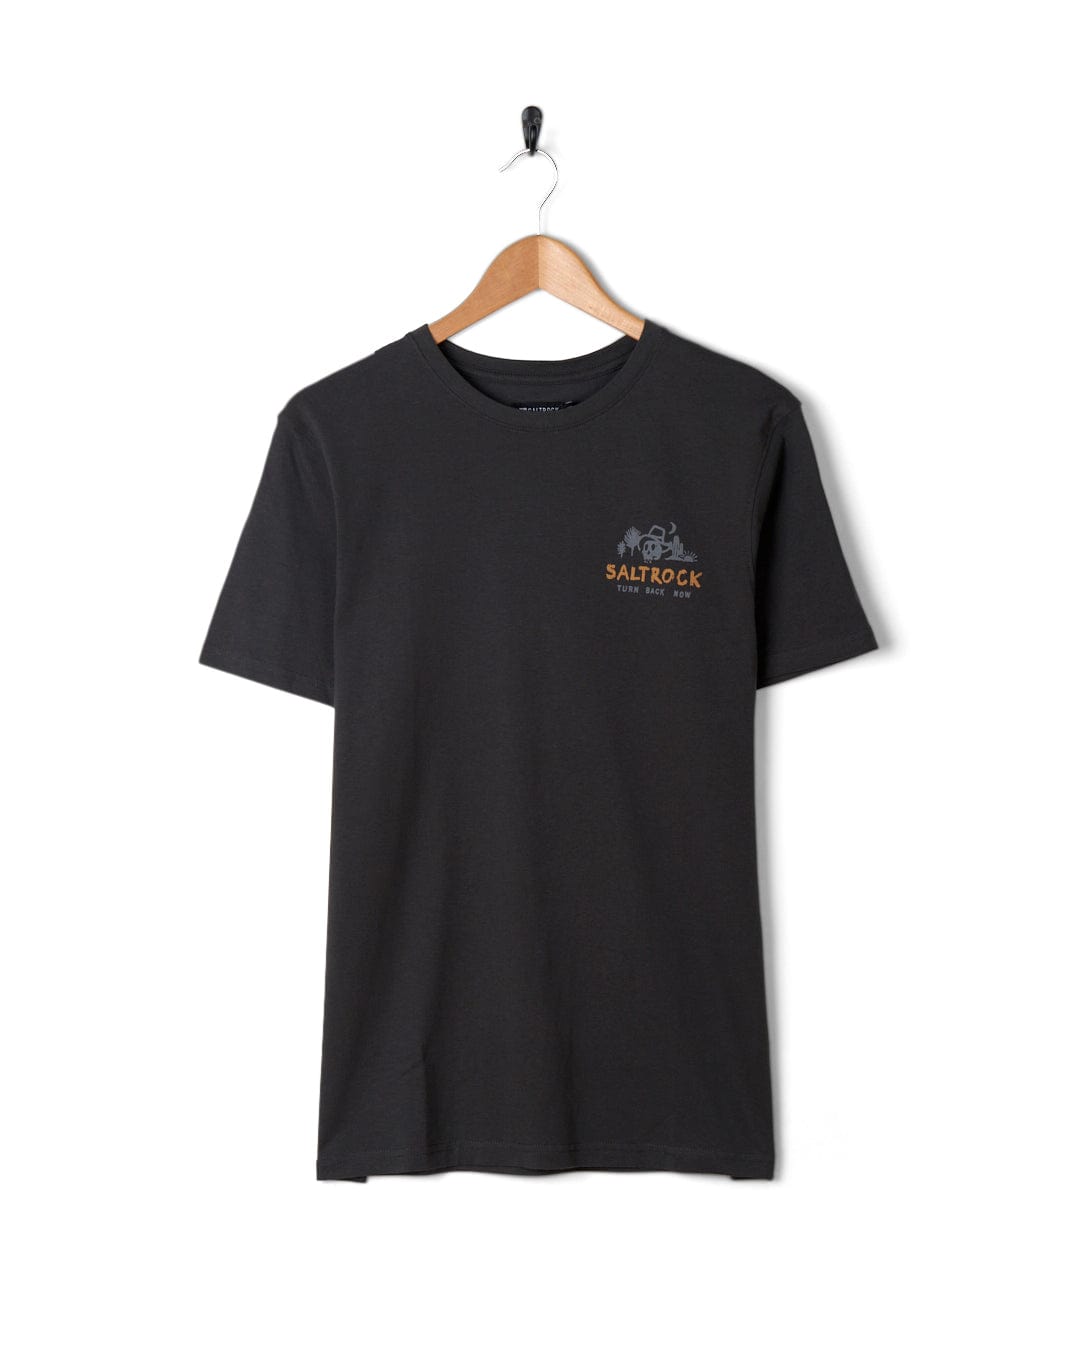 Dark grey Last Stop Motel - Mens Short Sleeve T-Shirt with a small Saltrock branding on the chest, hanging against a white background.